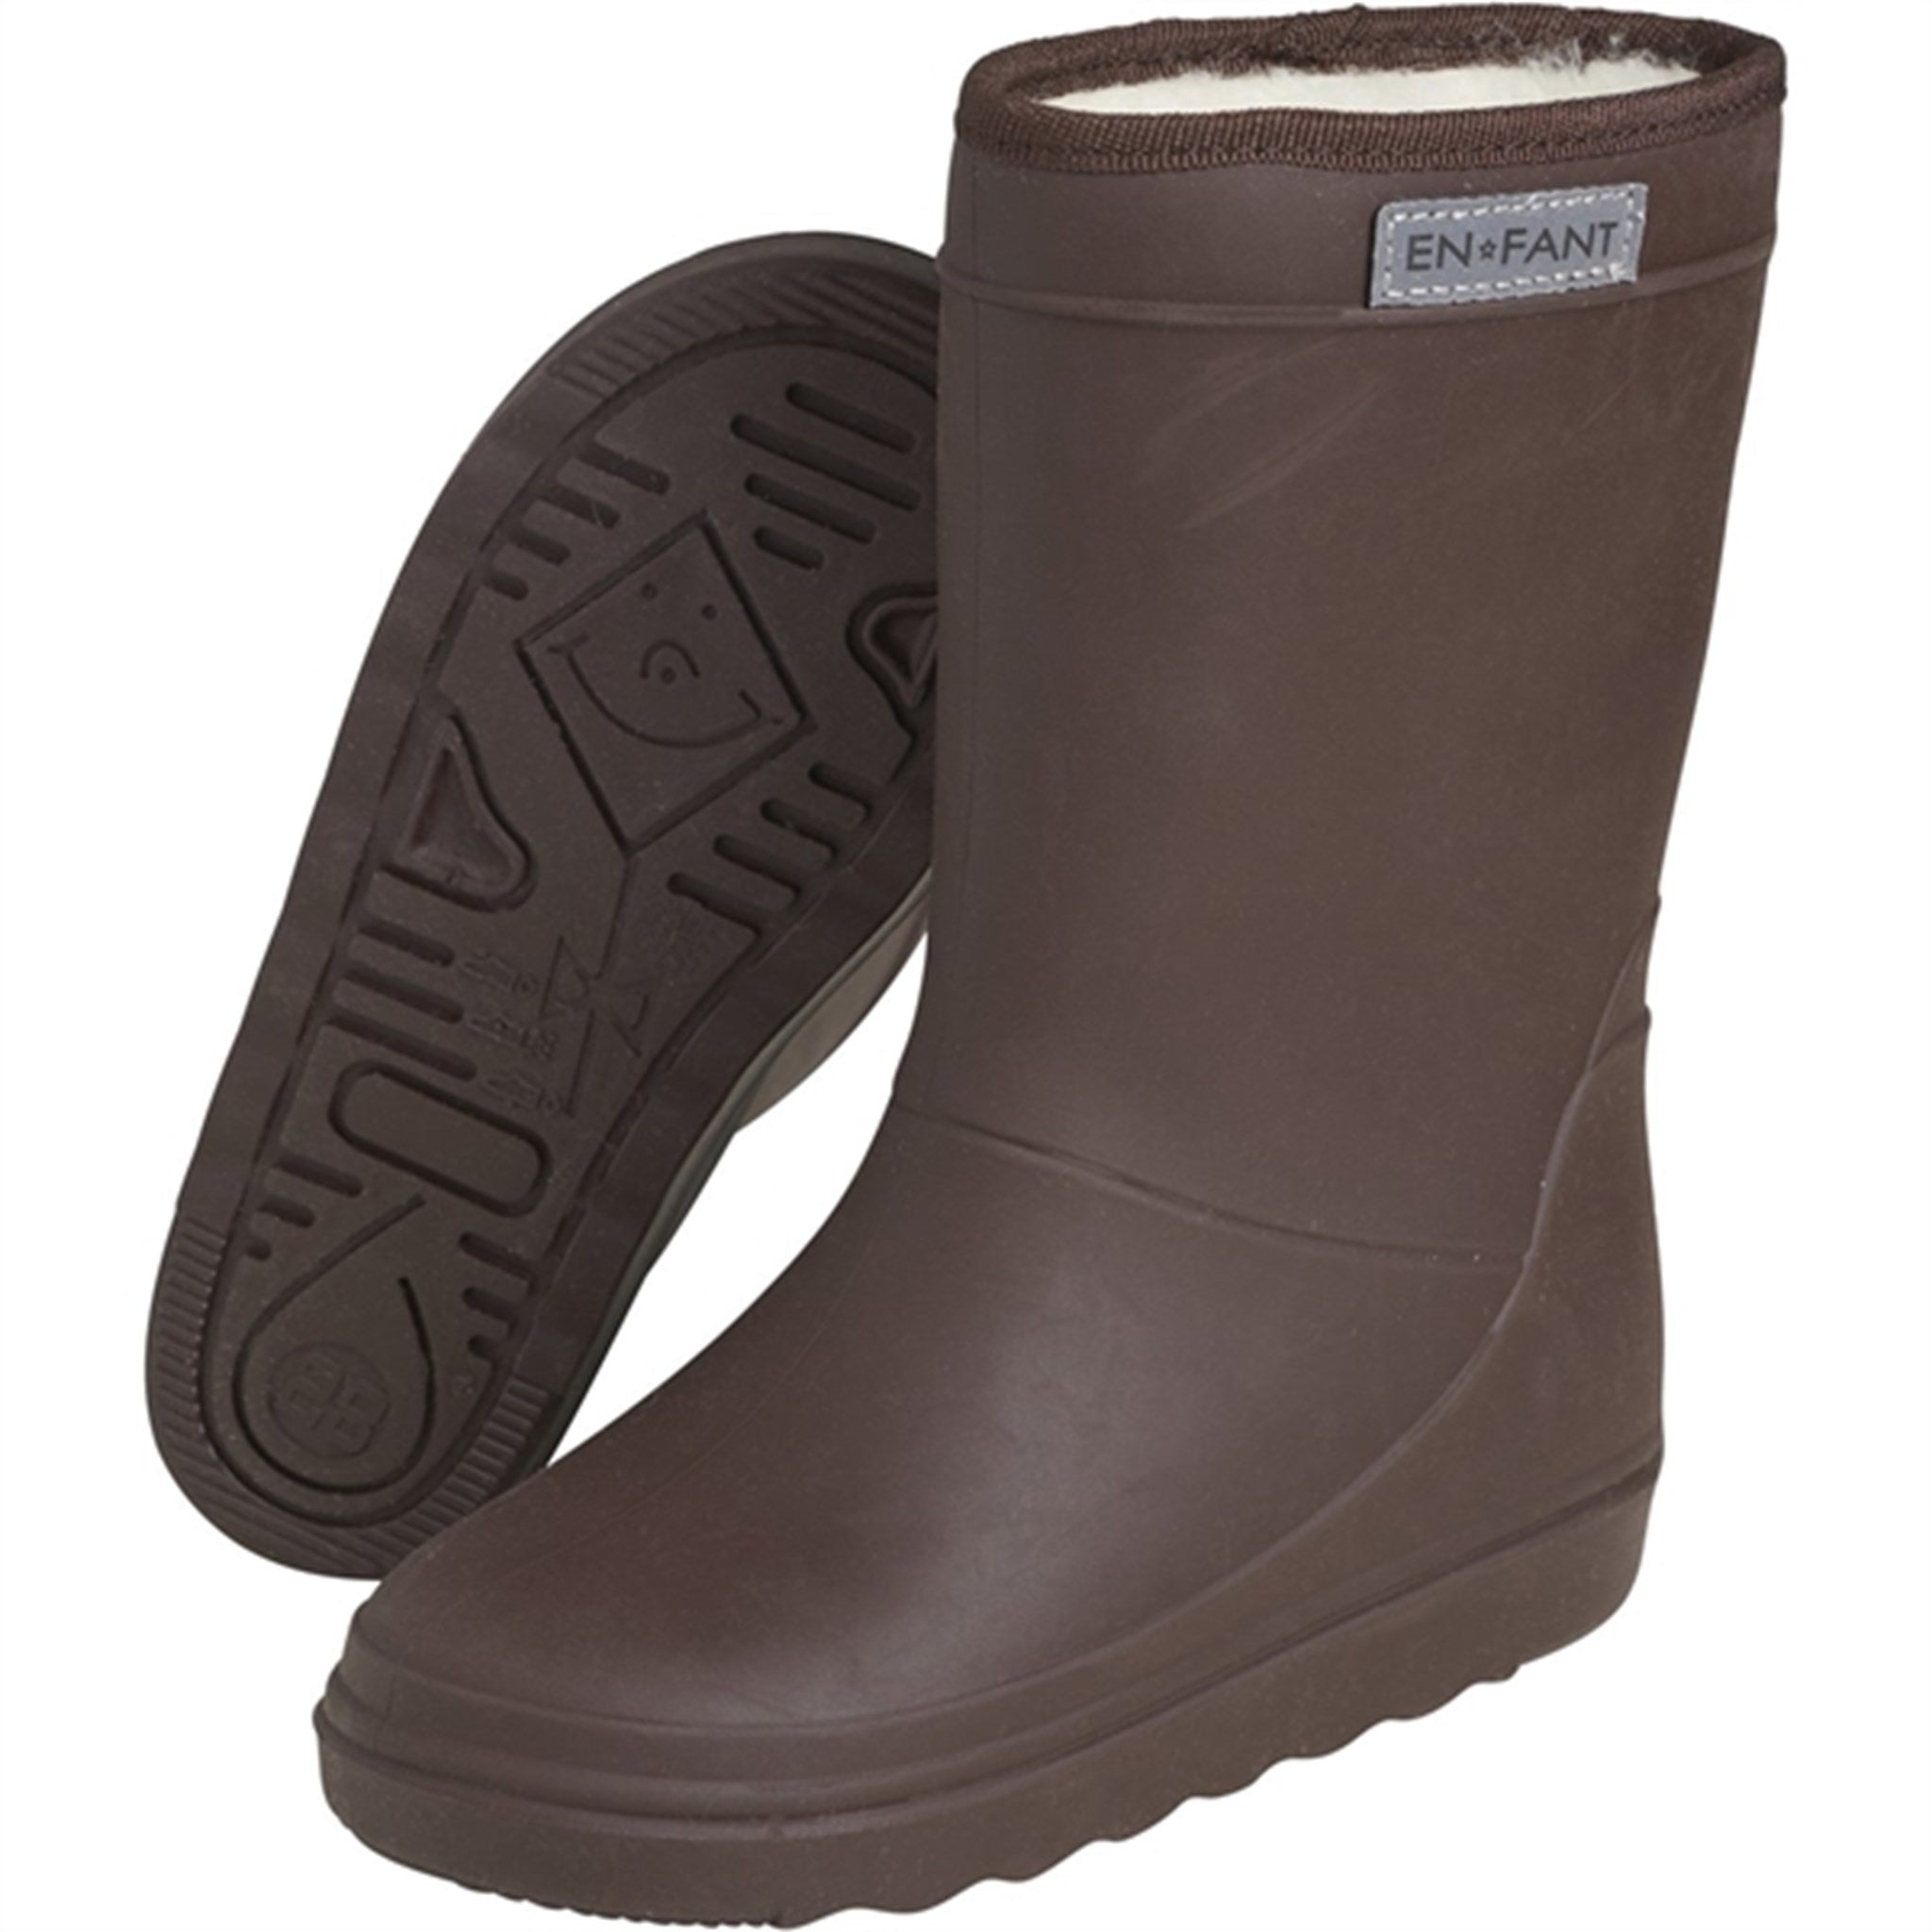 En Fant Thermo Boots Coffee Bean 3